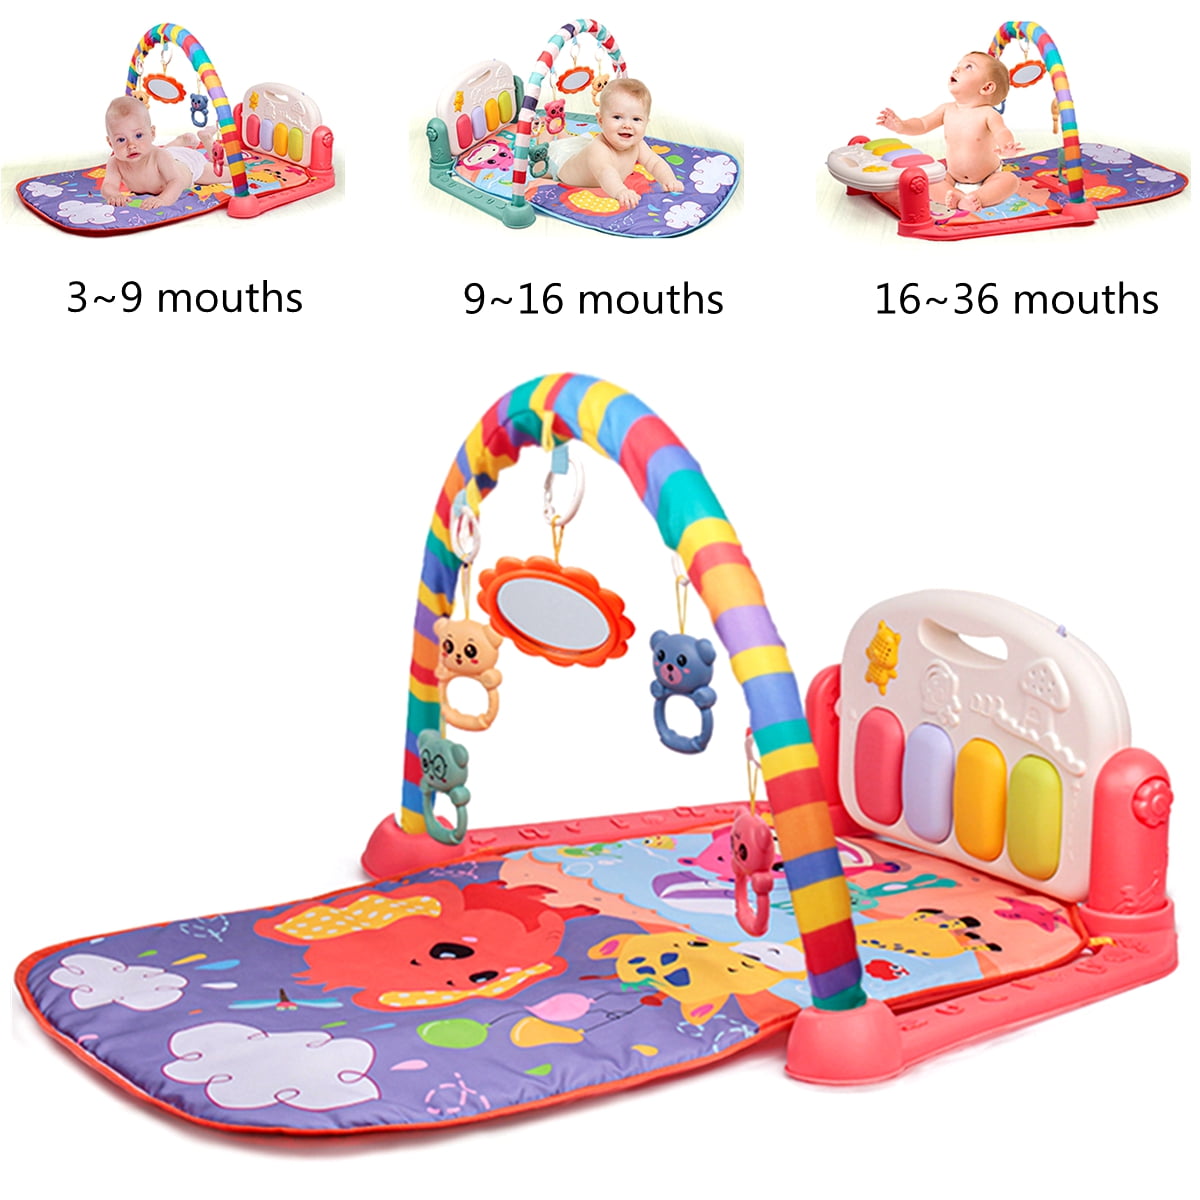 4 in 1 Baby Gym Floor Play Mat Musical Activity Center Kick And Play Piano Toy 